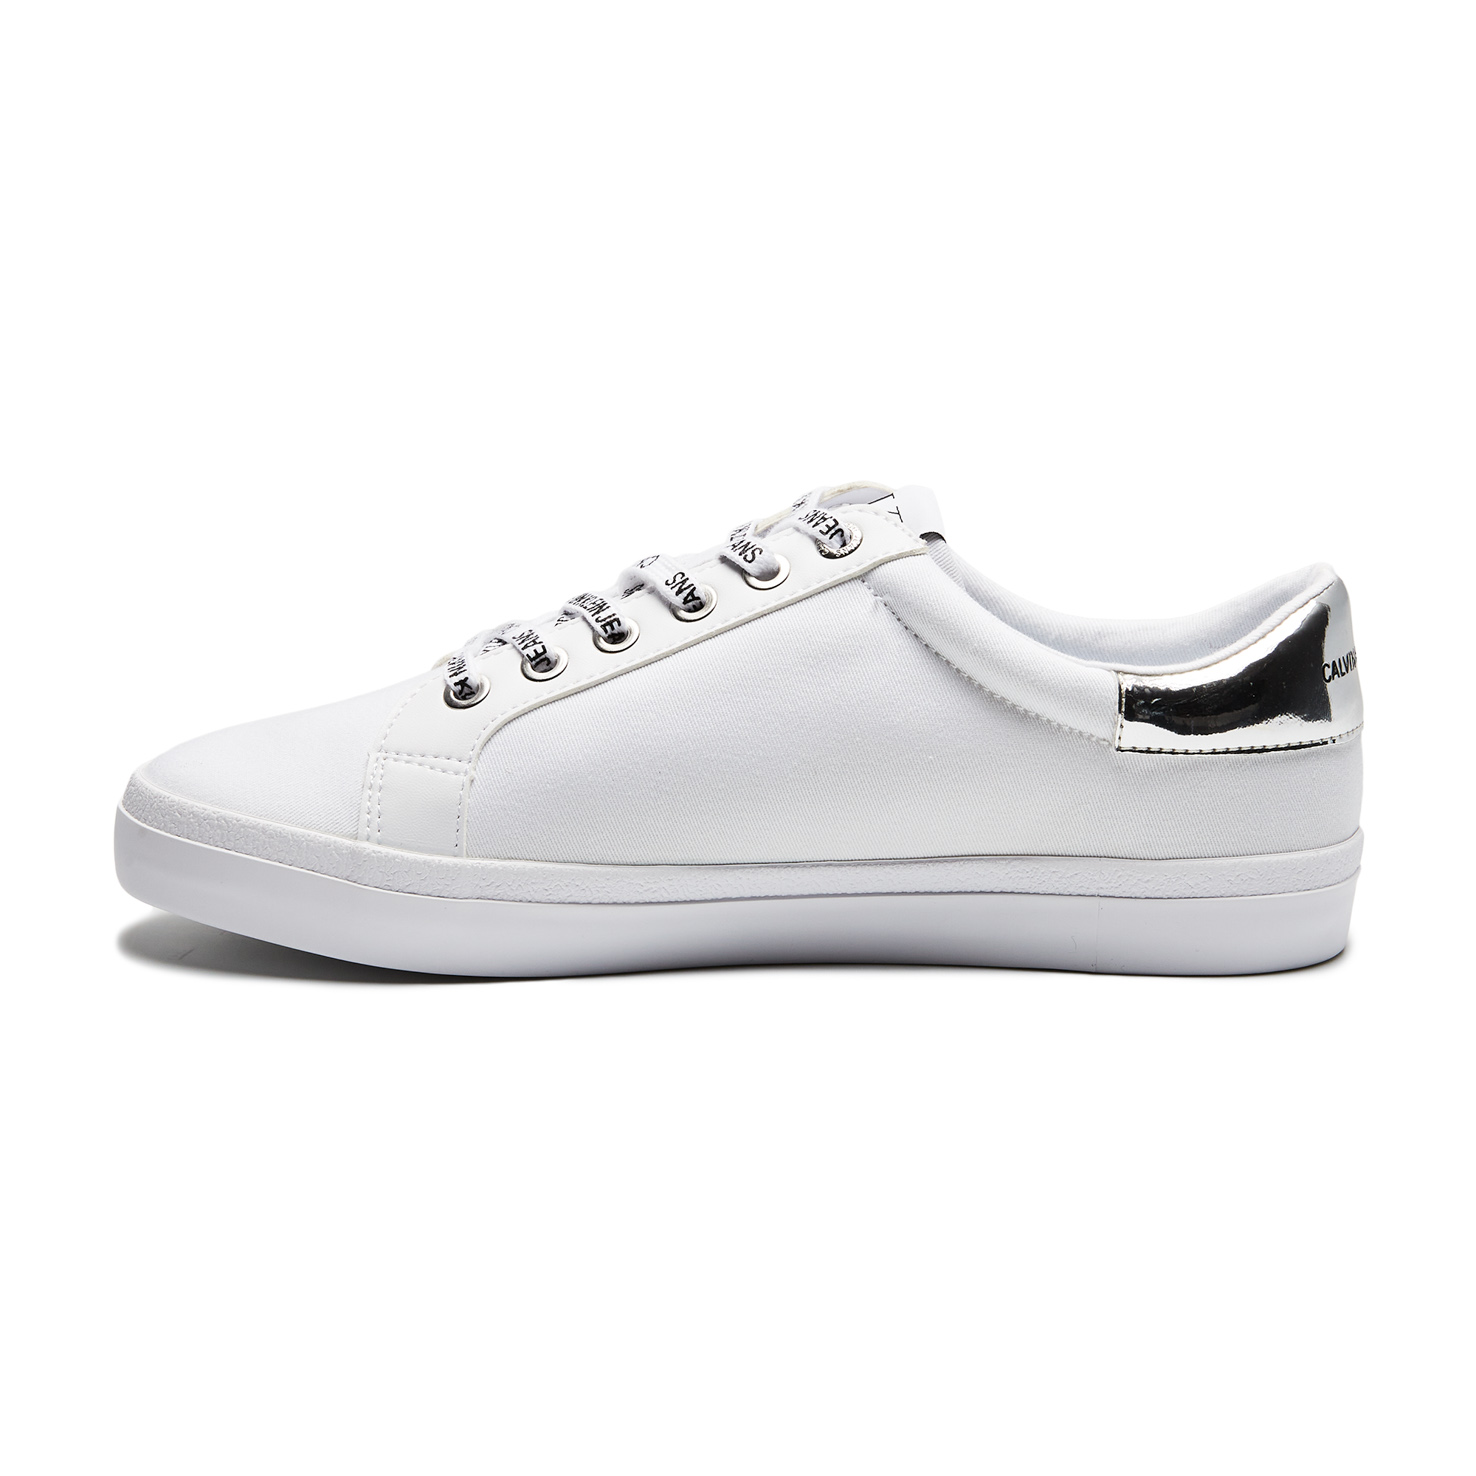 LOW PROFILE SNEAKER LACEUP CO CALVIN KLEIN, размер 36, цвет белый CKYW0YW00057 - фото 5